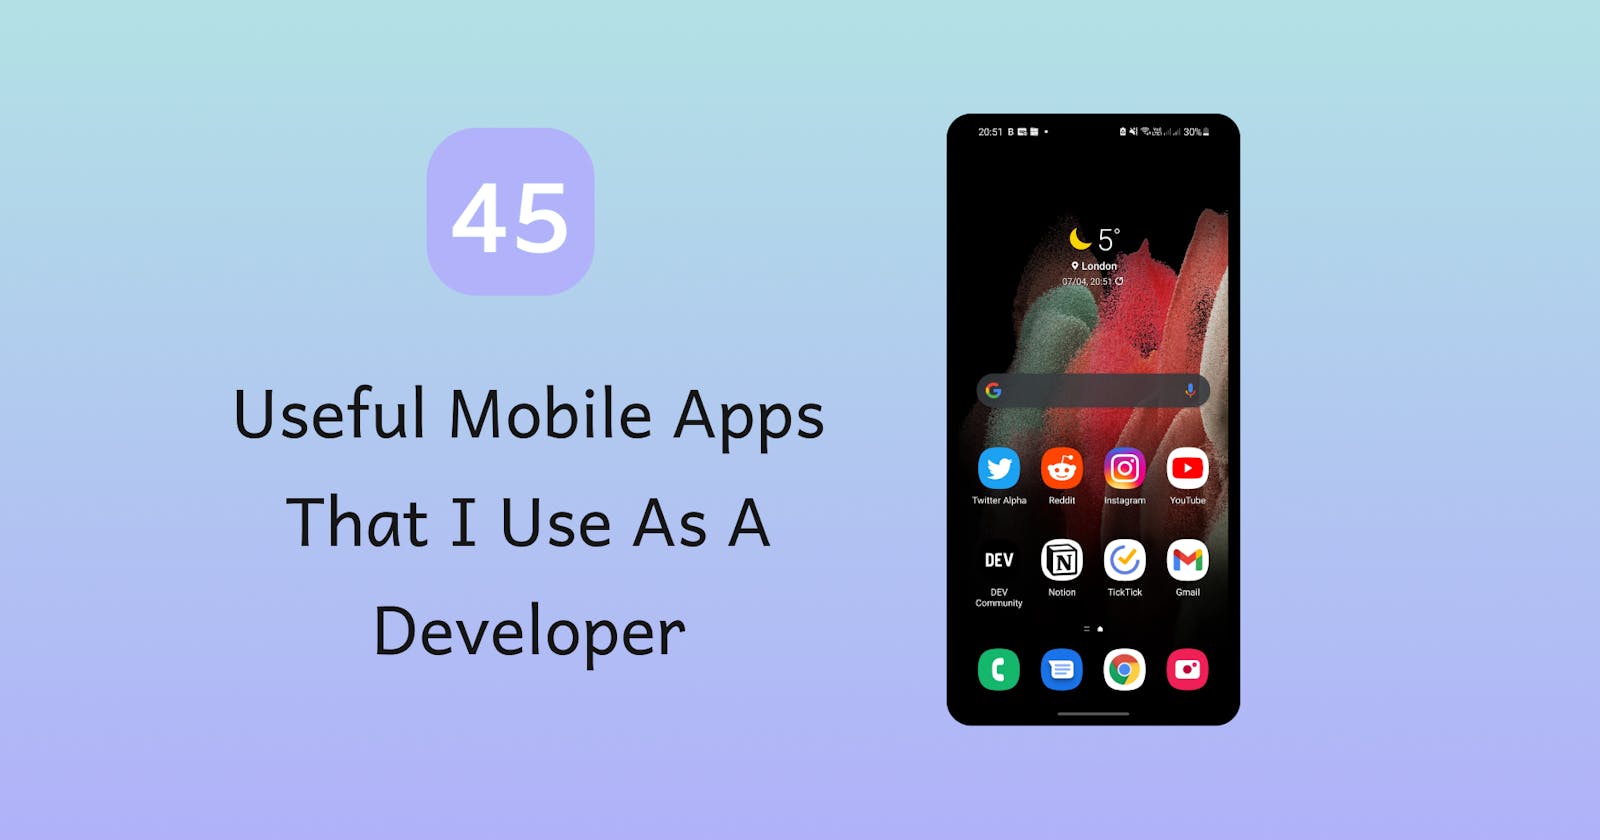 45 useful mobile apps that I use as a developer